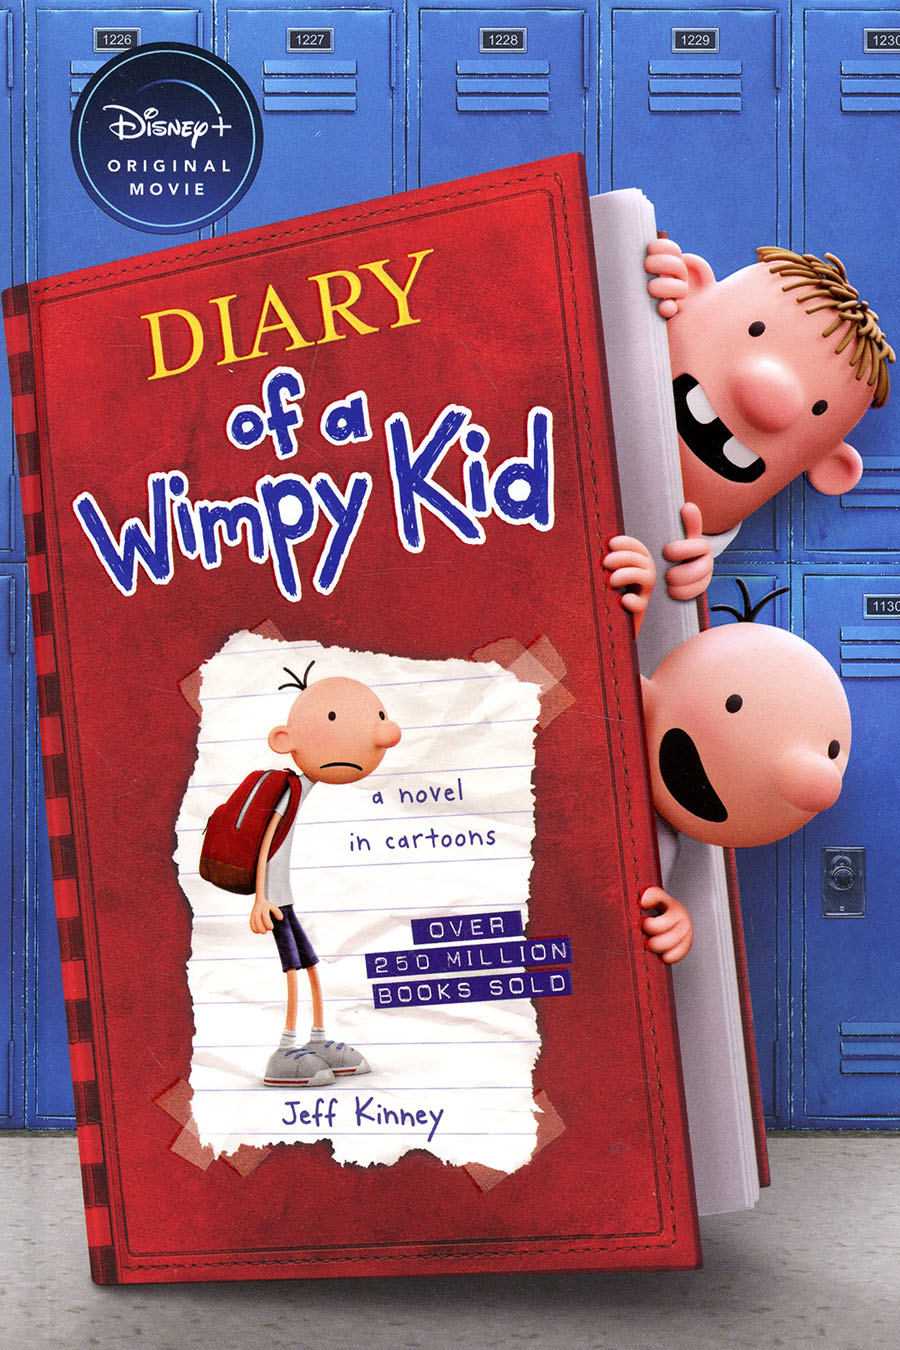 Diary Of A Wimpy Kid Vol 1 HC Special Disney Plus Cover Edition